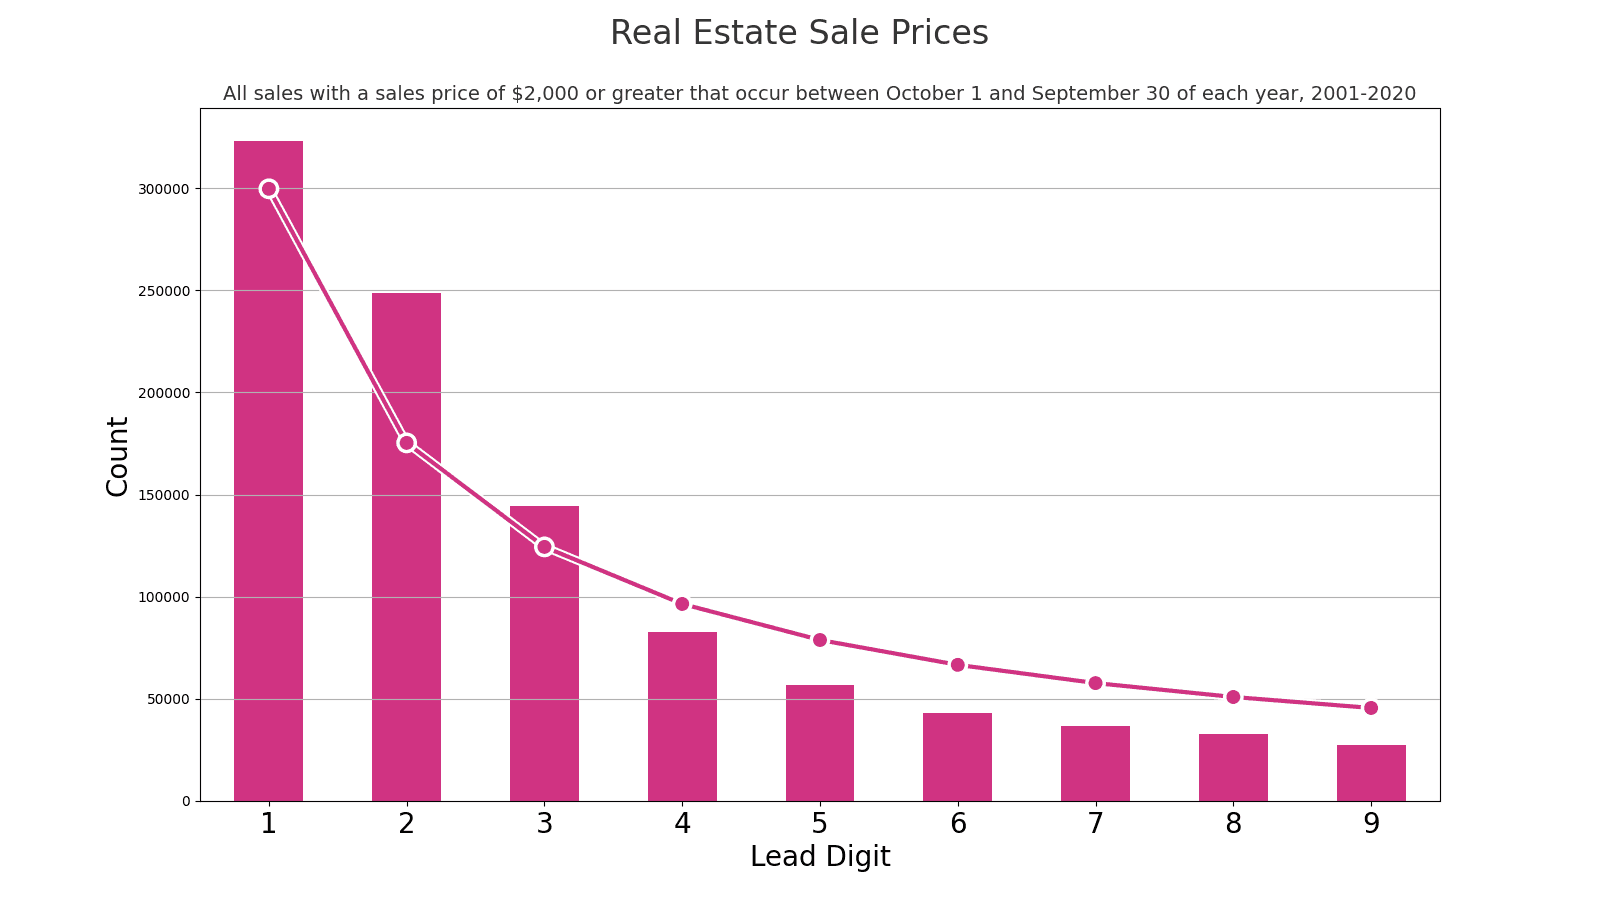 The distribution of lead digits from real estate sale prices.